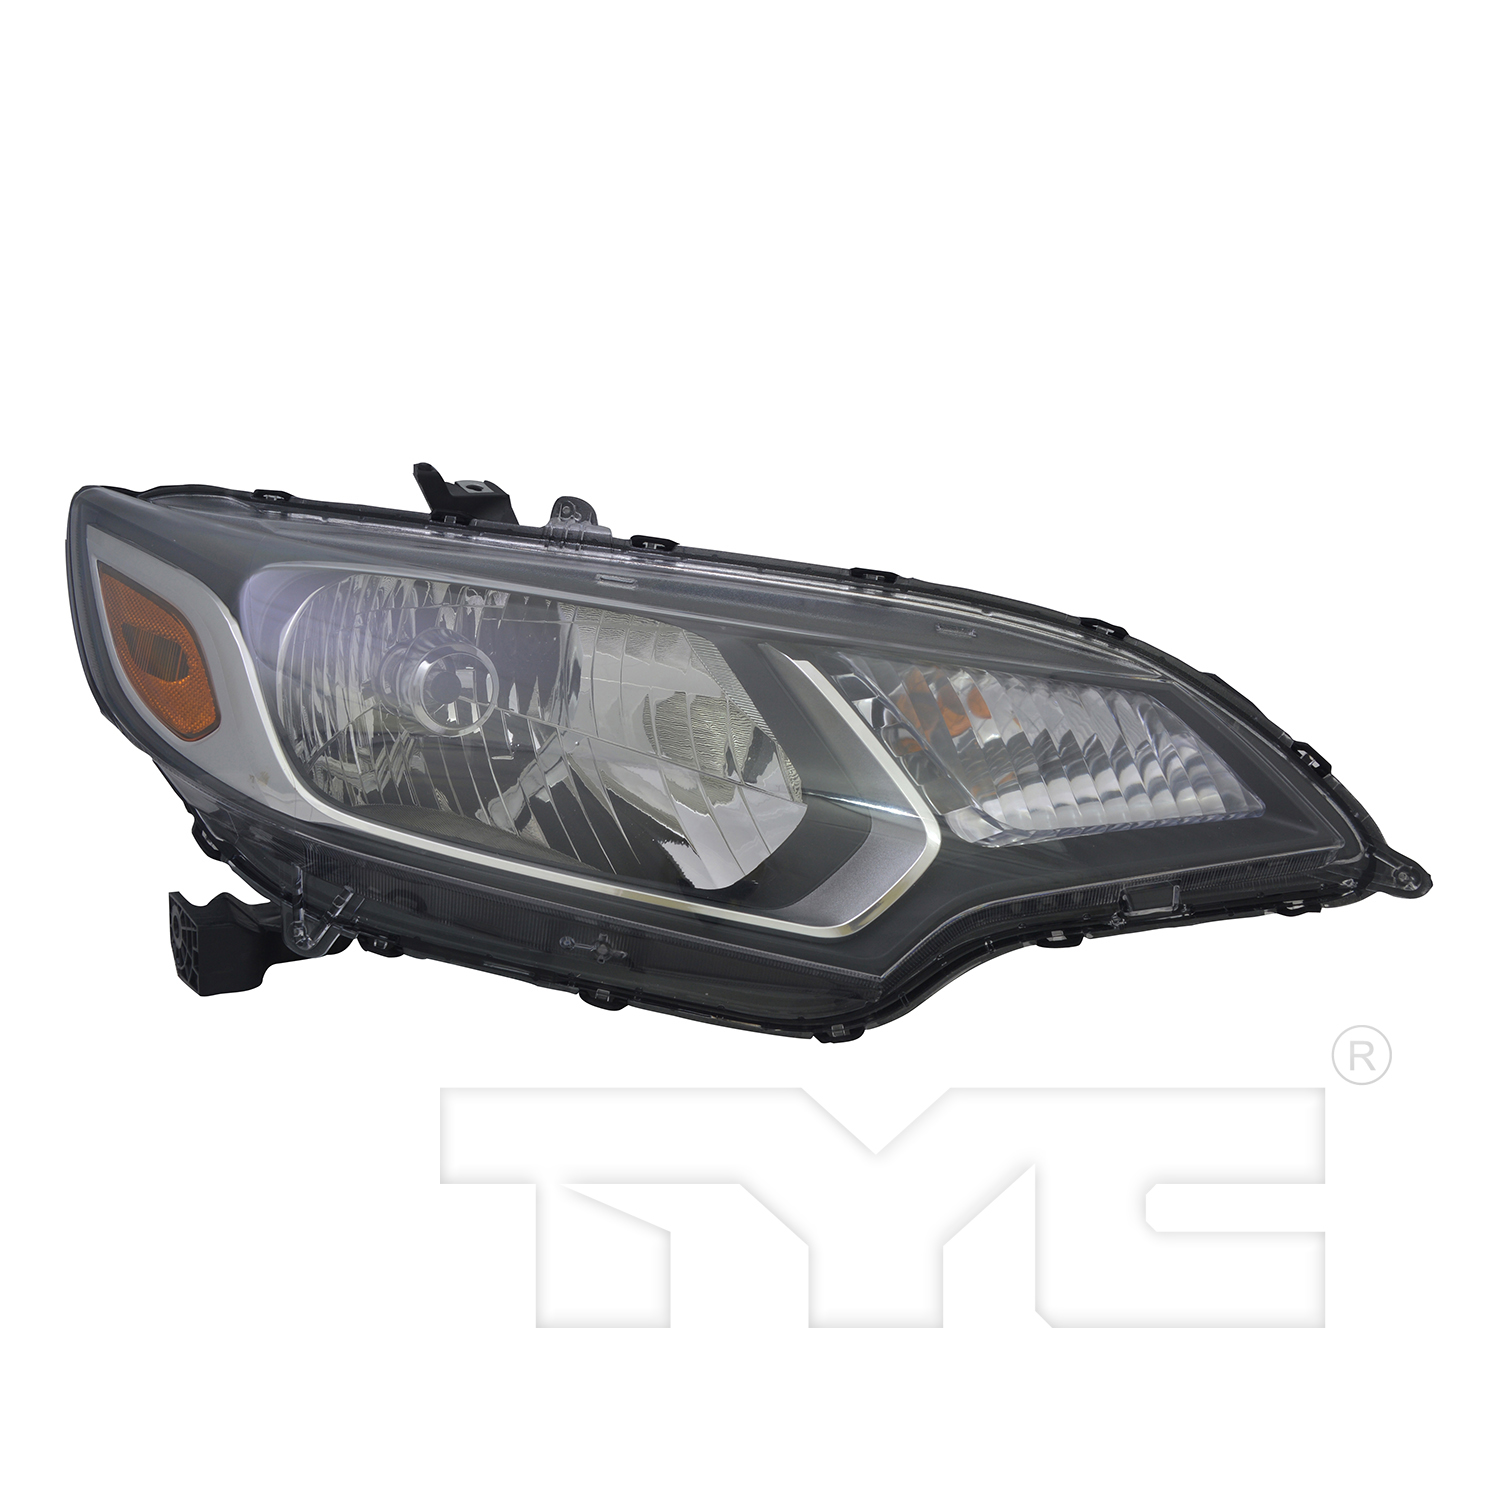 Aftermarket HEADLIGHTS for HONDA - FIT, FIT,15-17,RT Headlamp assy composite